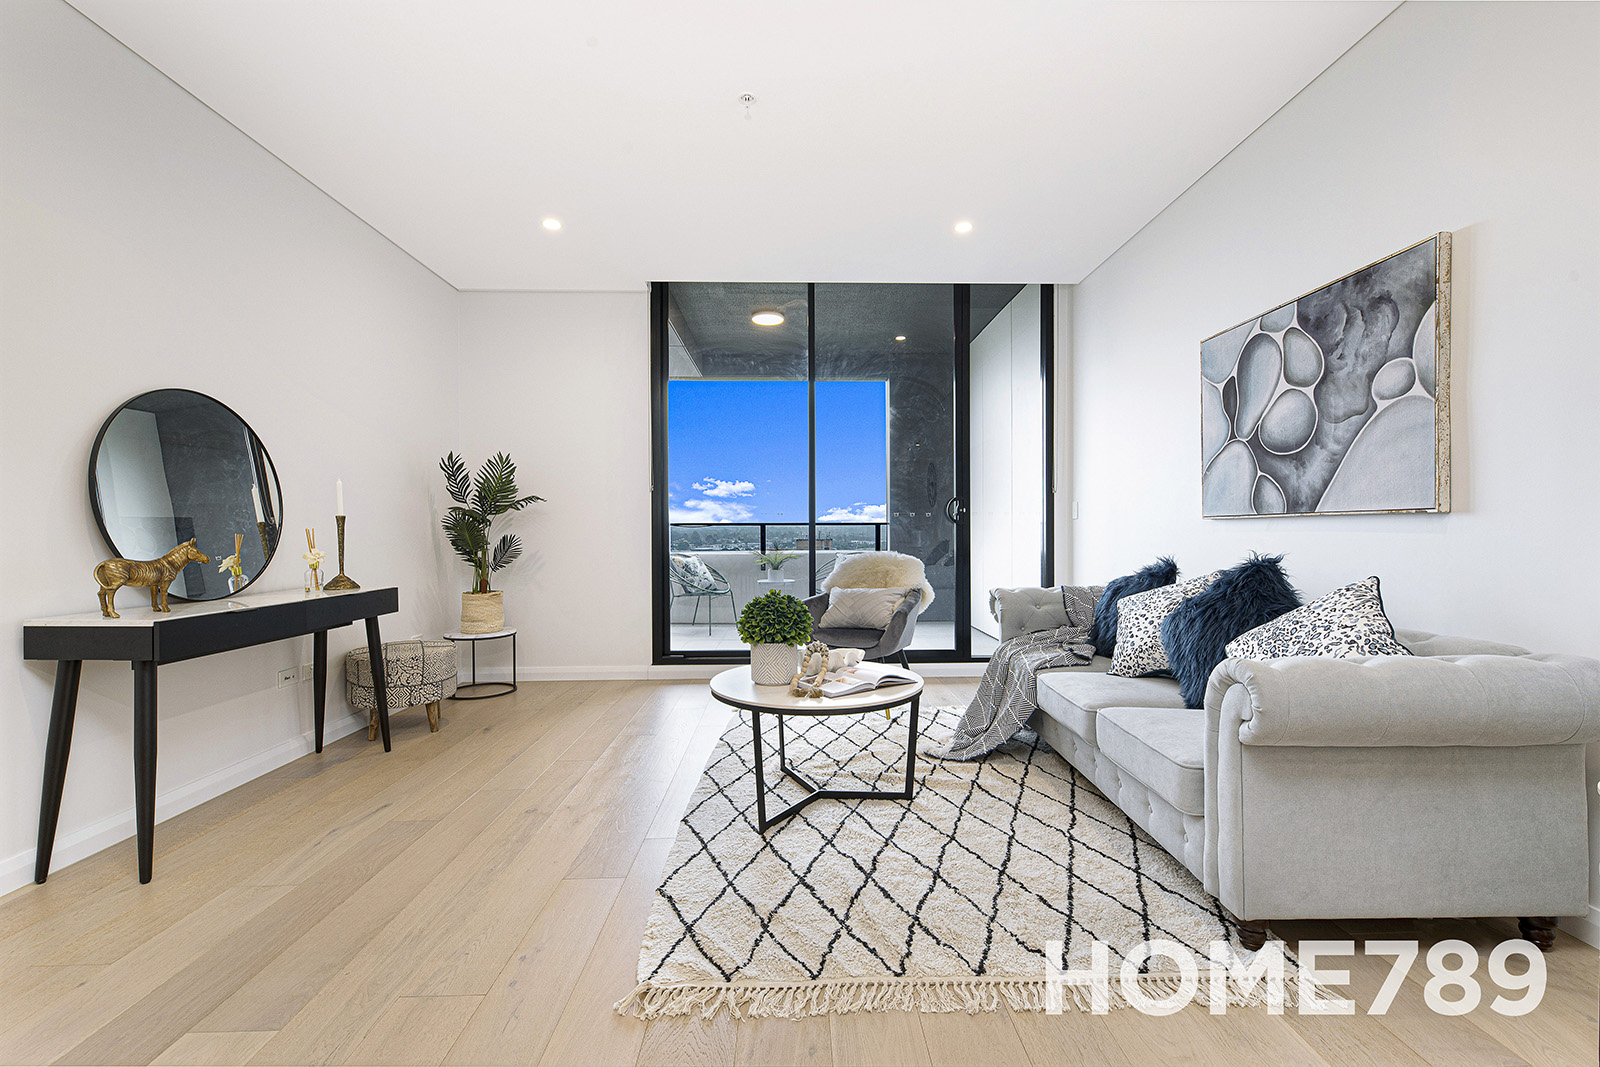 HOME789 - Sydney based Real Estate and Property Service Company